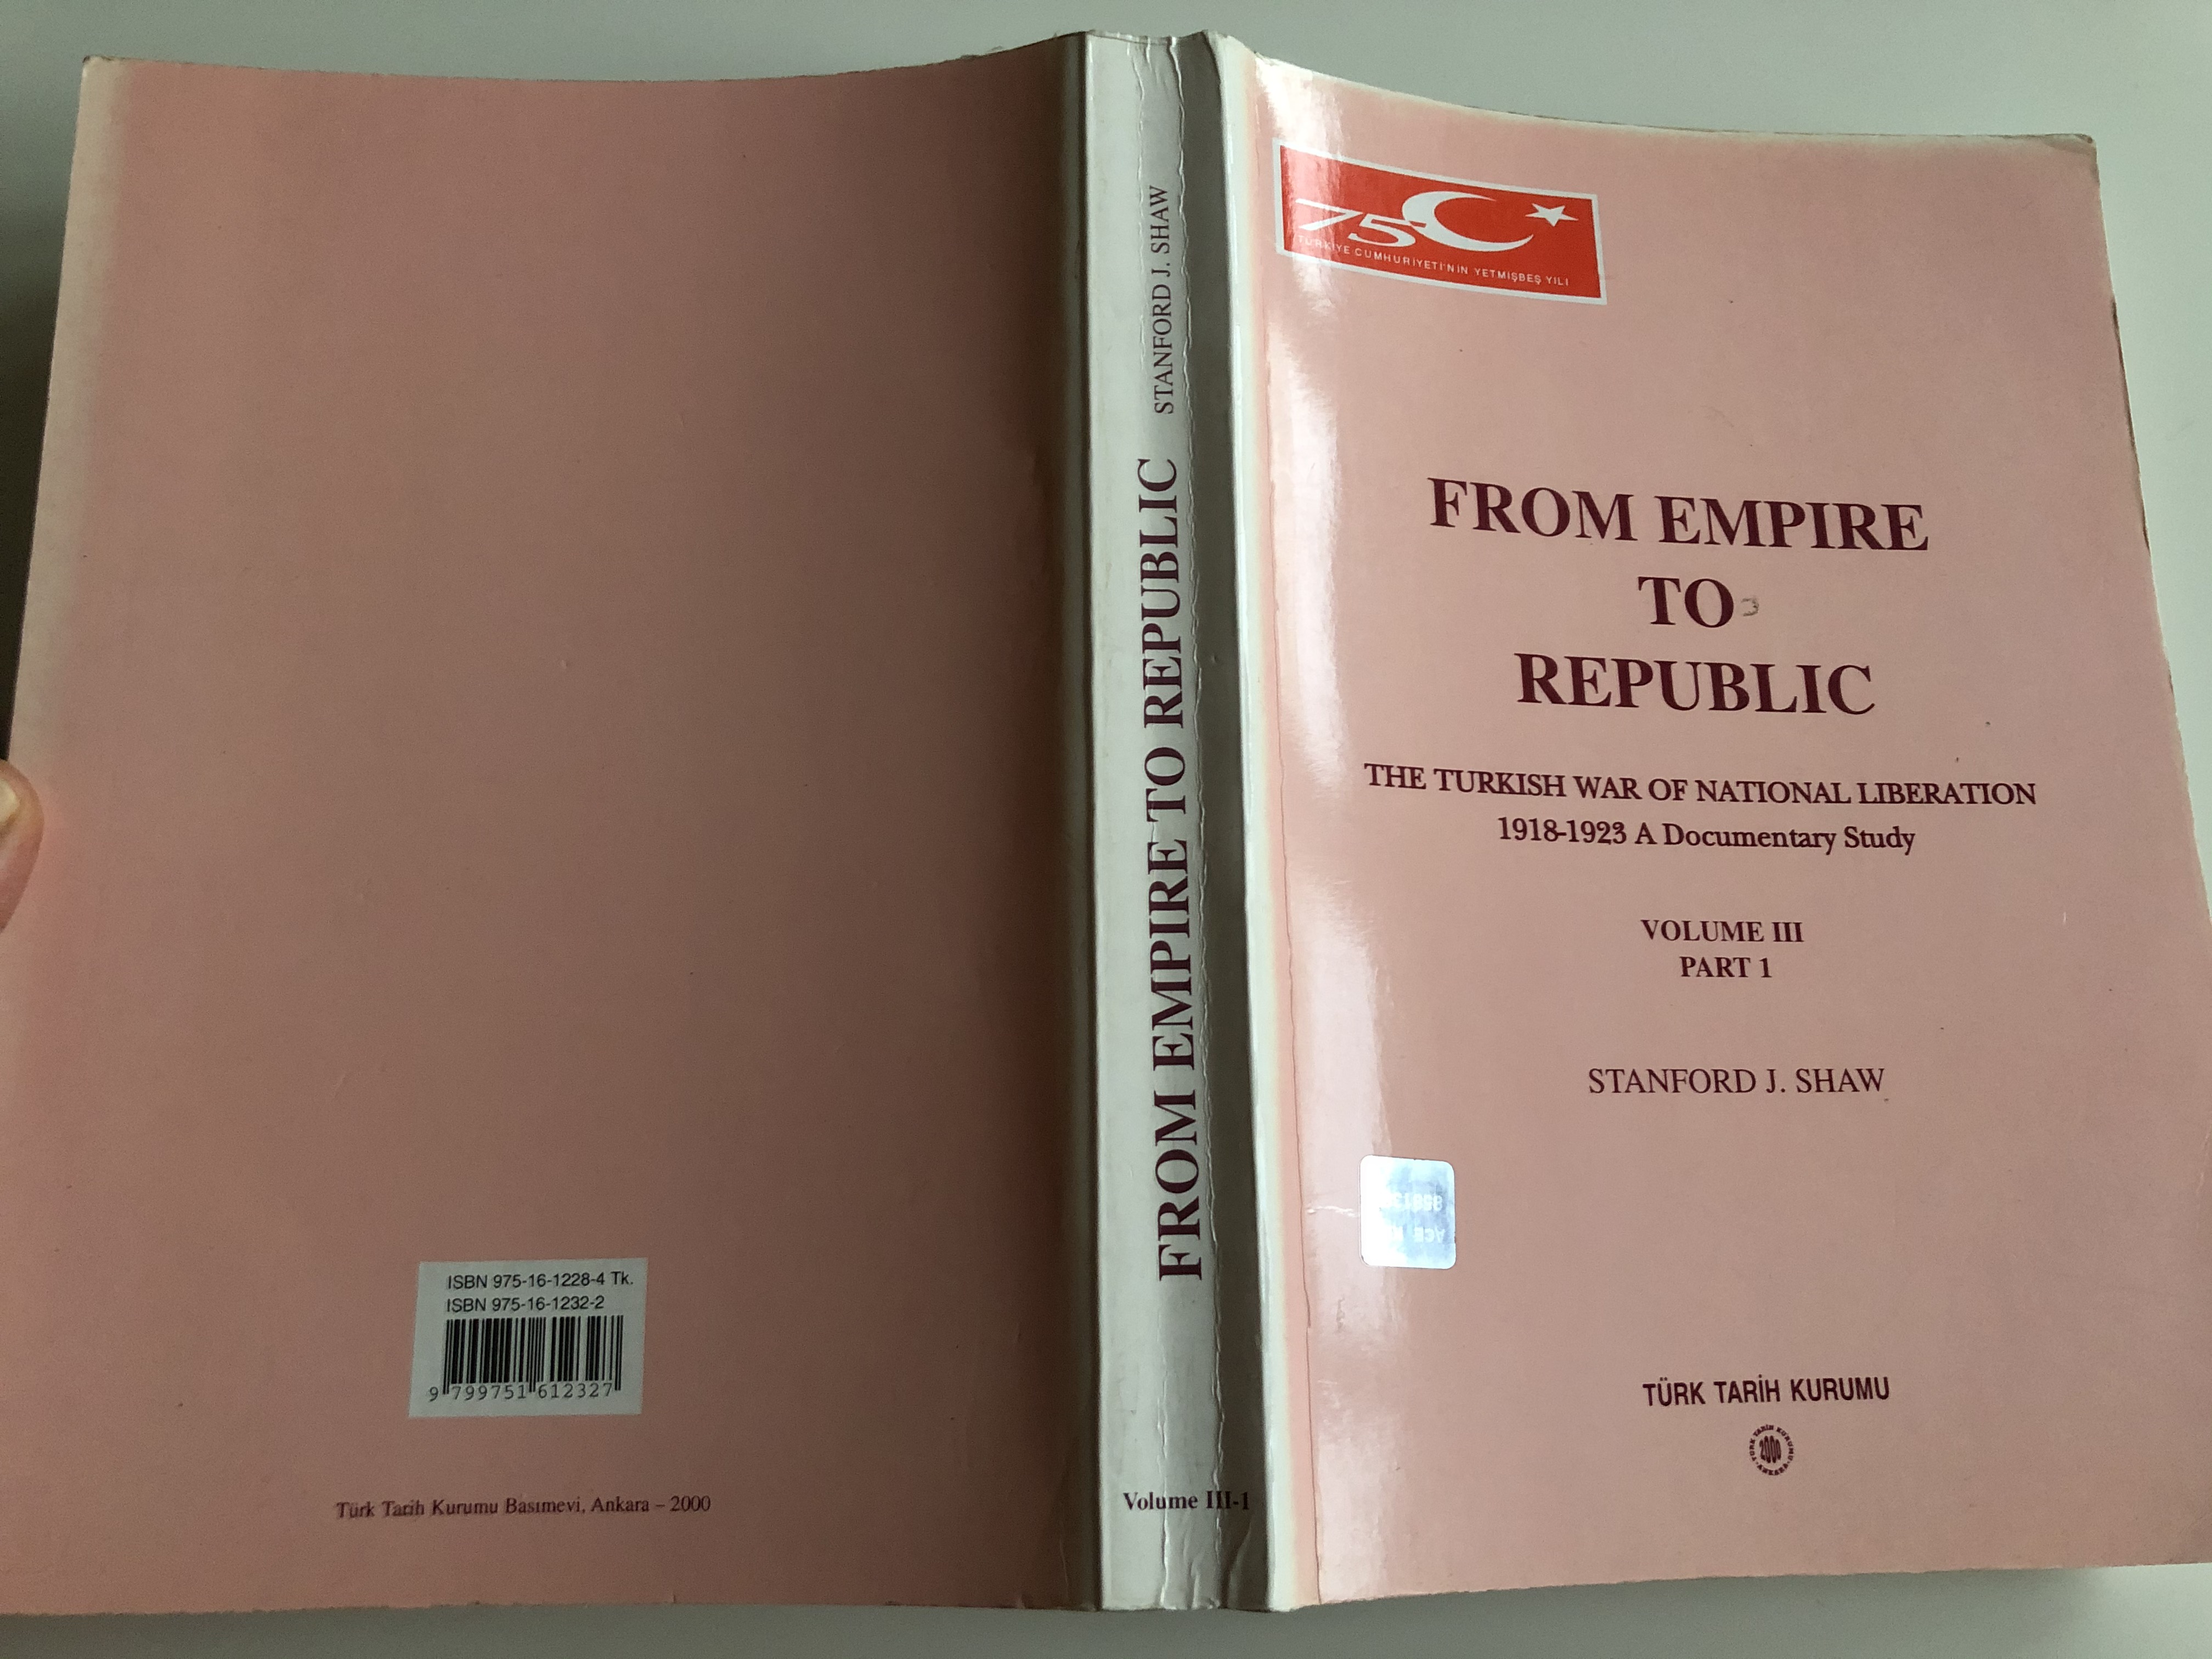 from-empire-to-republic-the-turkish-war-of-national-liberation-by-stanford-j.-shaw-12-.jpg